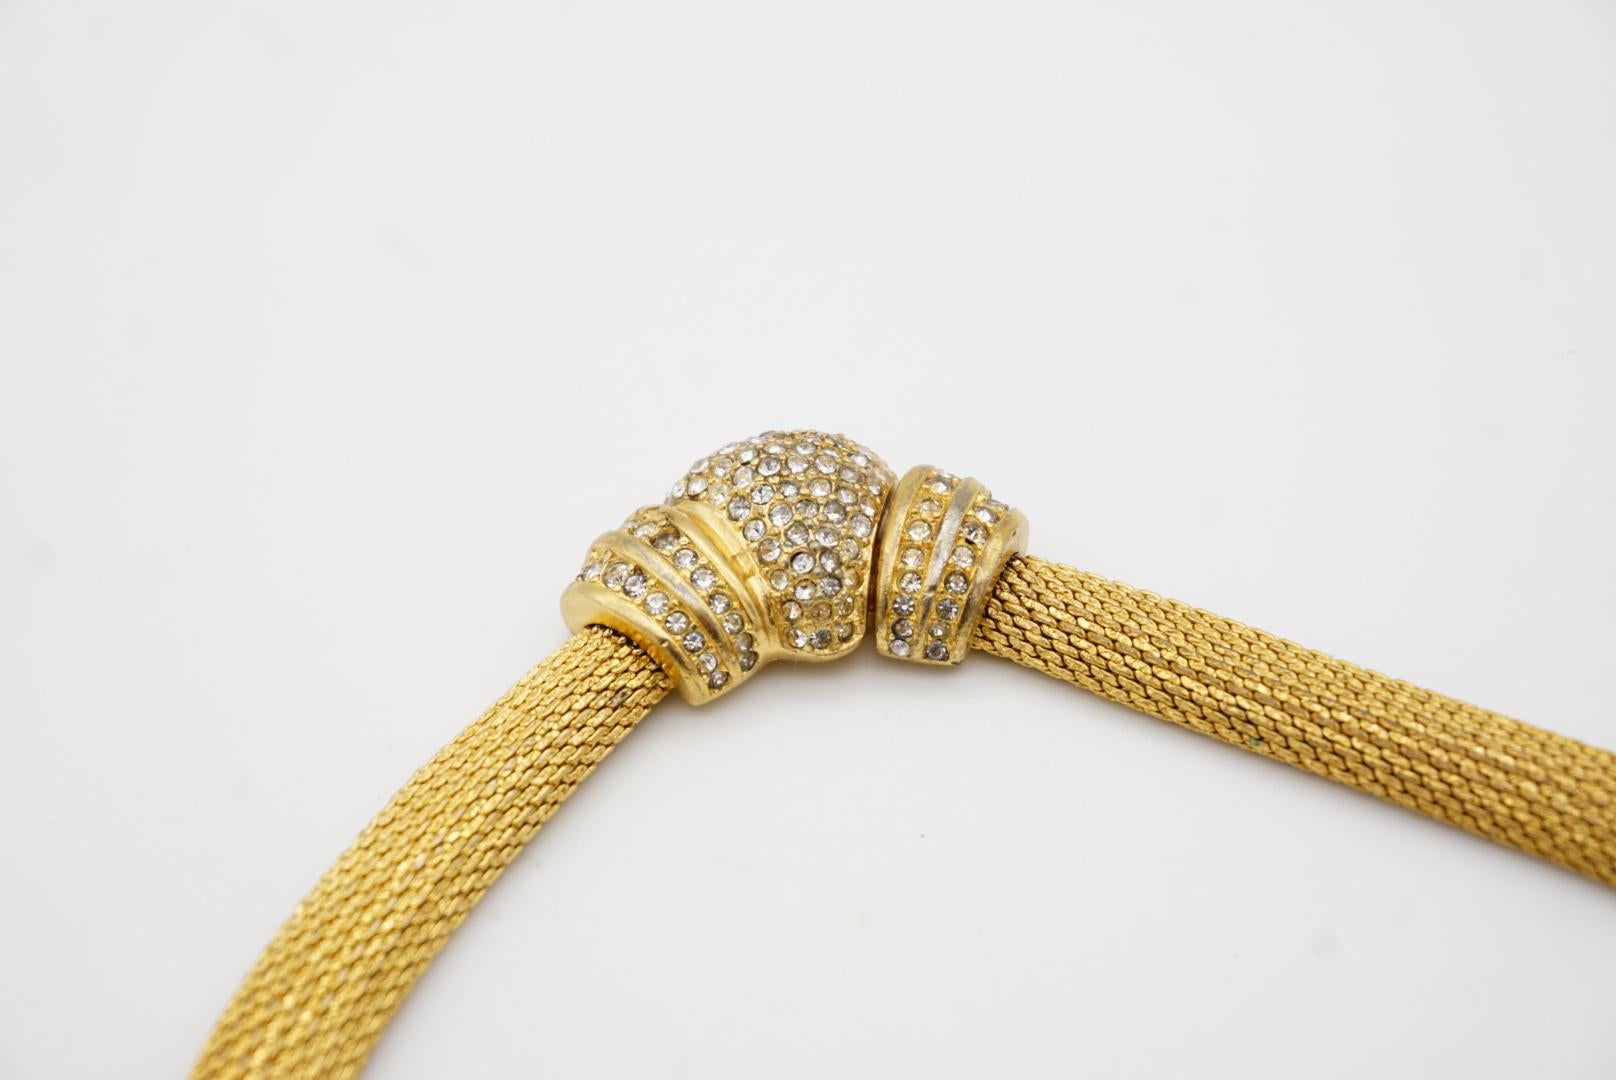 Christian Dior Vintage 1980s Whole Crystals Button Snake Omega Gold Necklace For Sale 2